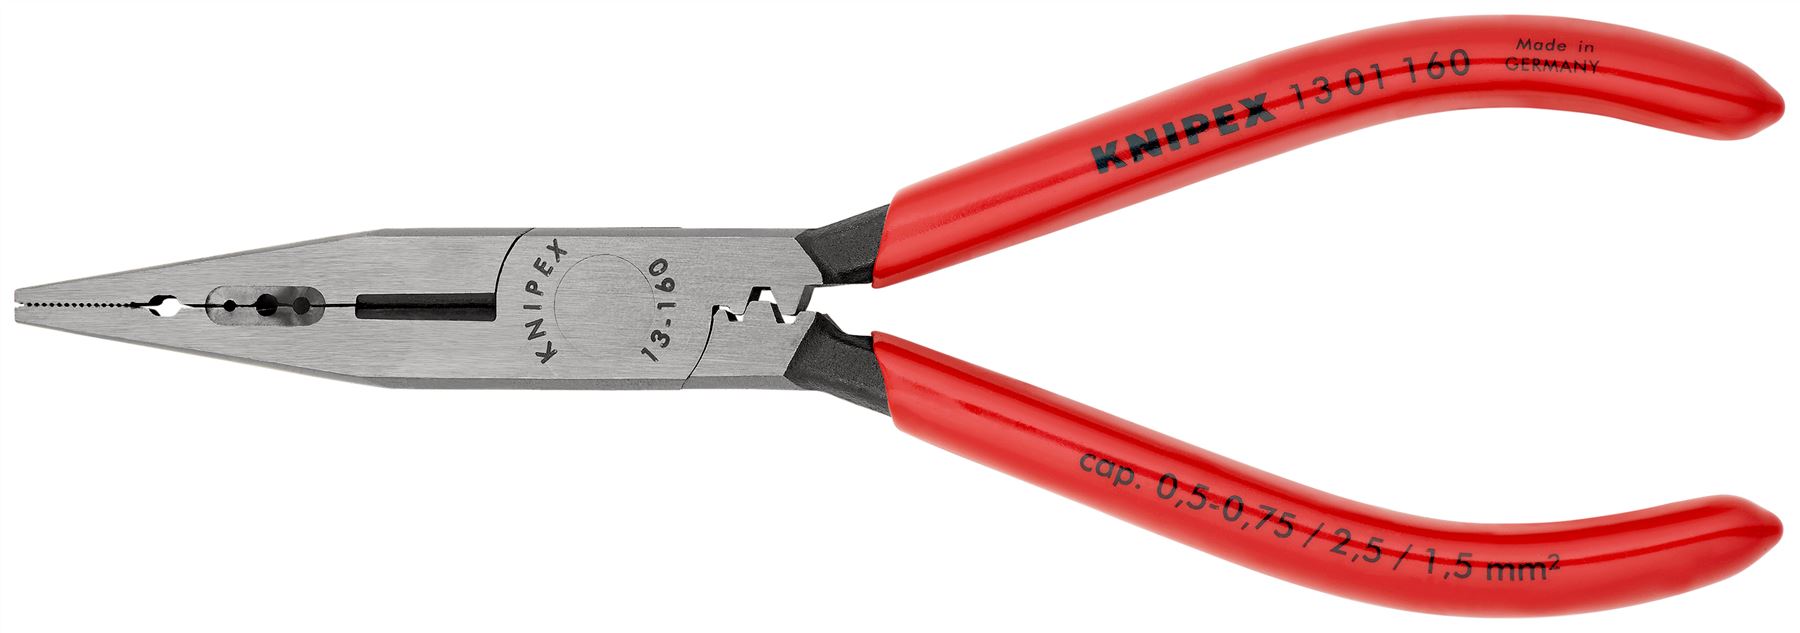 Knipex Electricians Pliers 160mm for Cable Work Black Atramentized 13 01 160